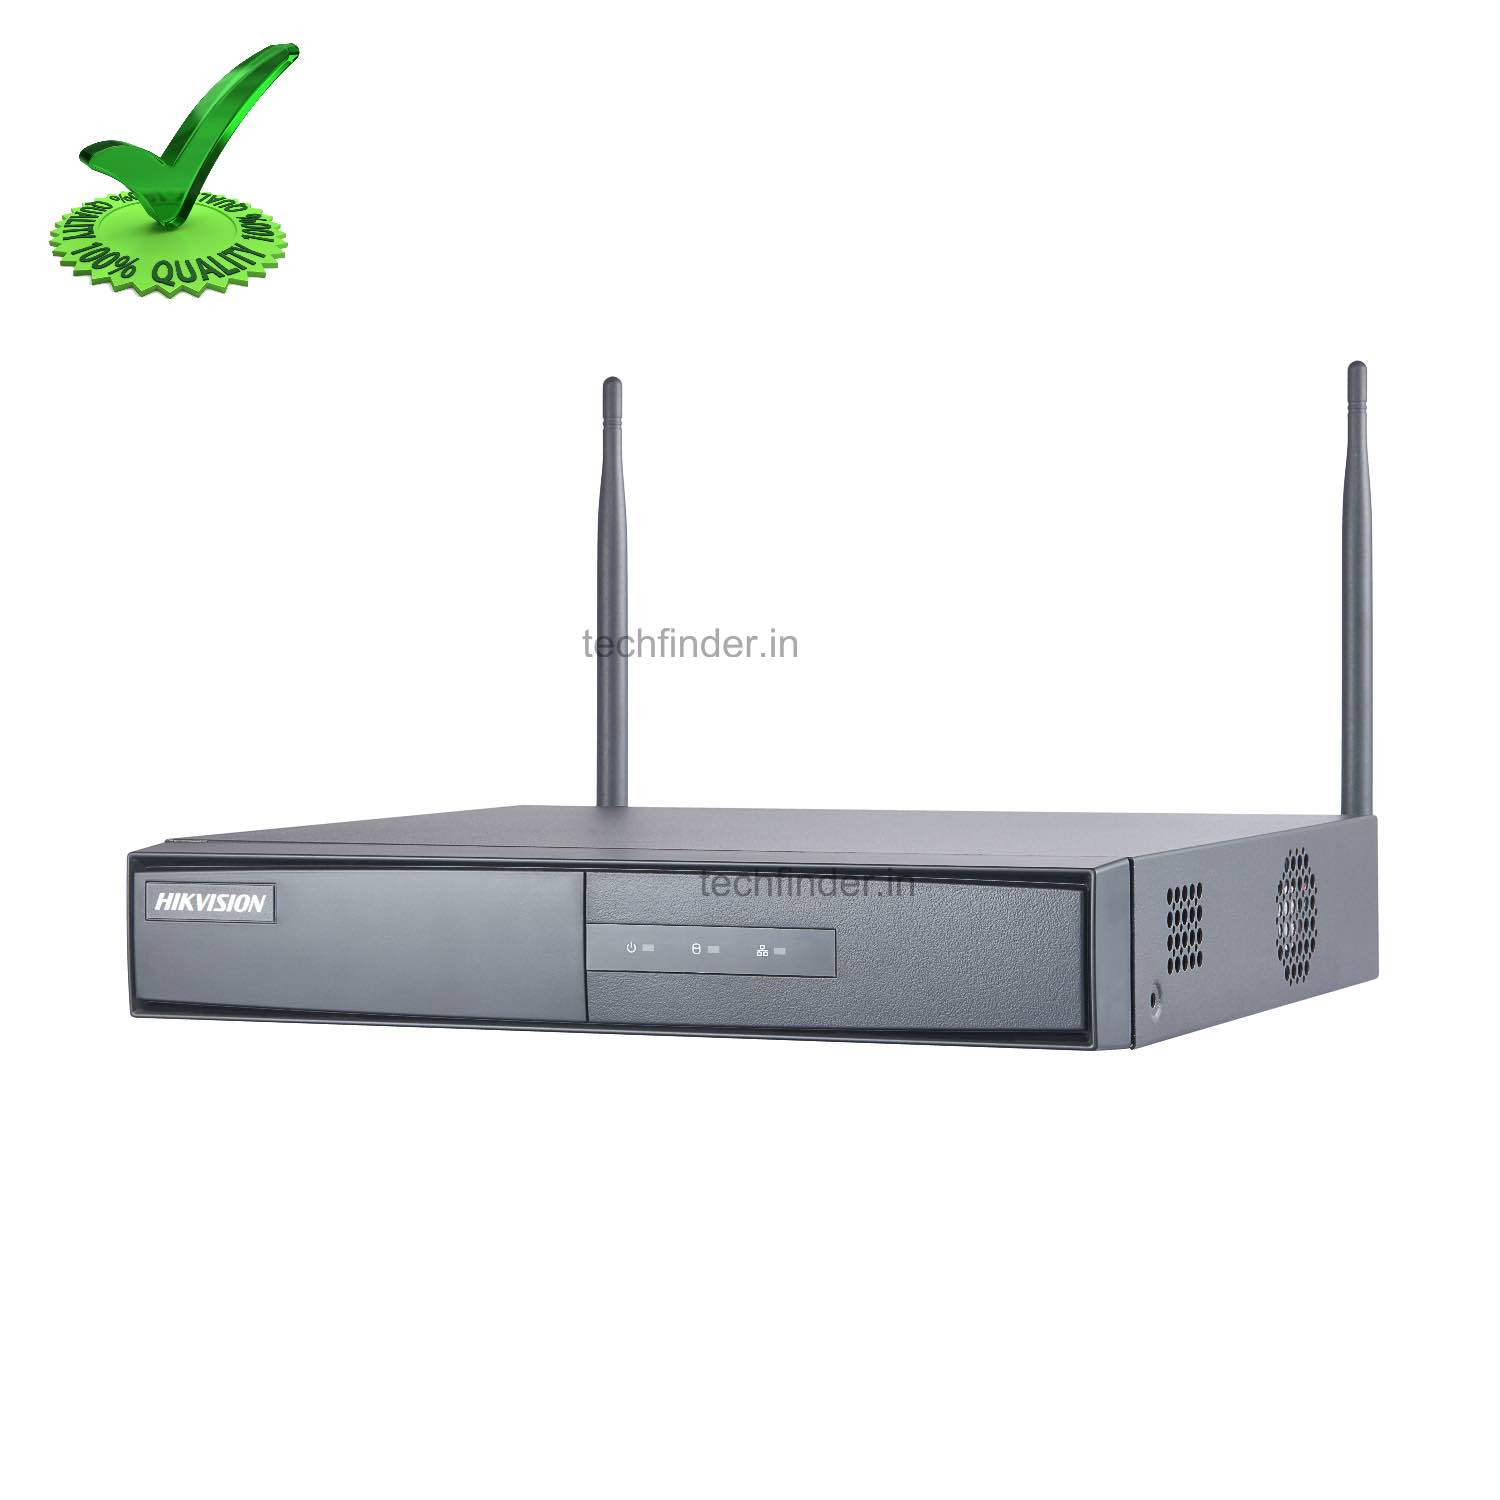 Hikvision DS-7604NI-K1/W 4Ch HD NVR